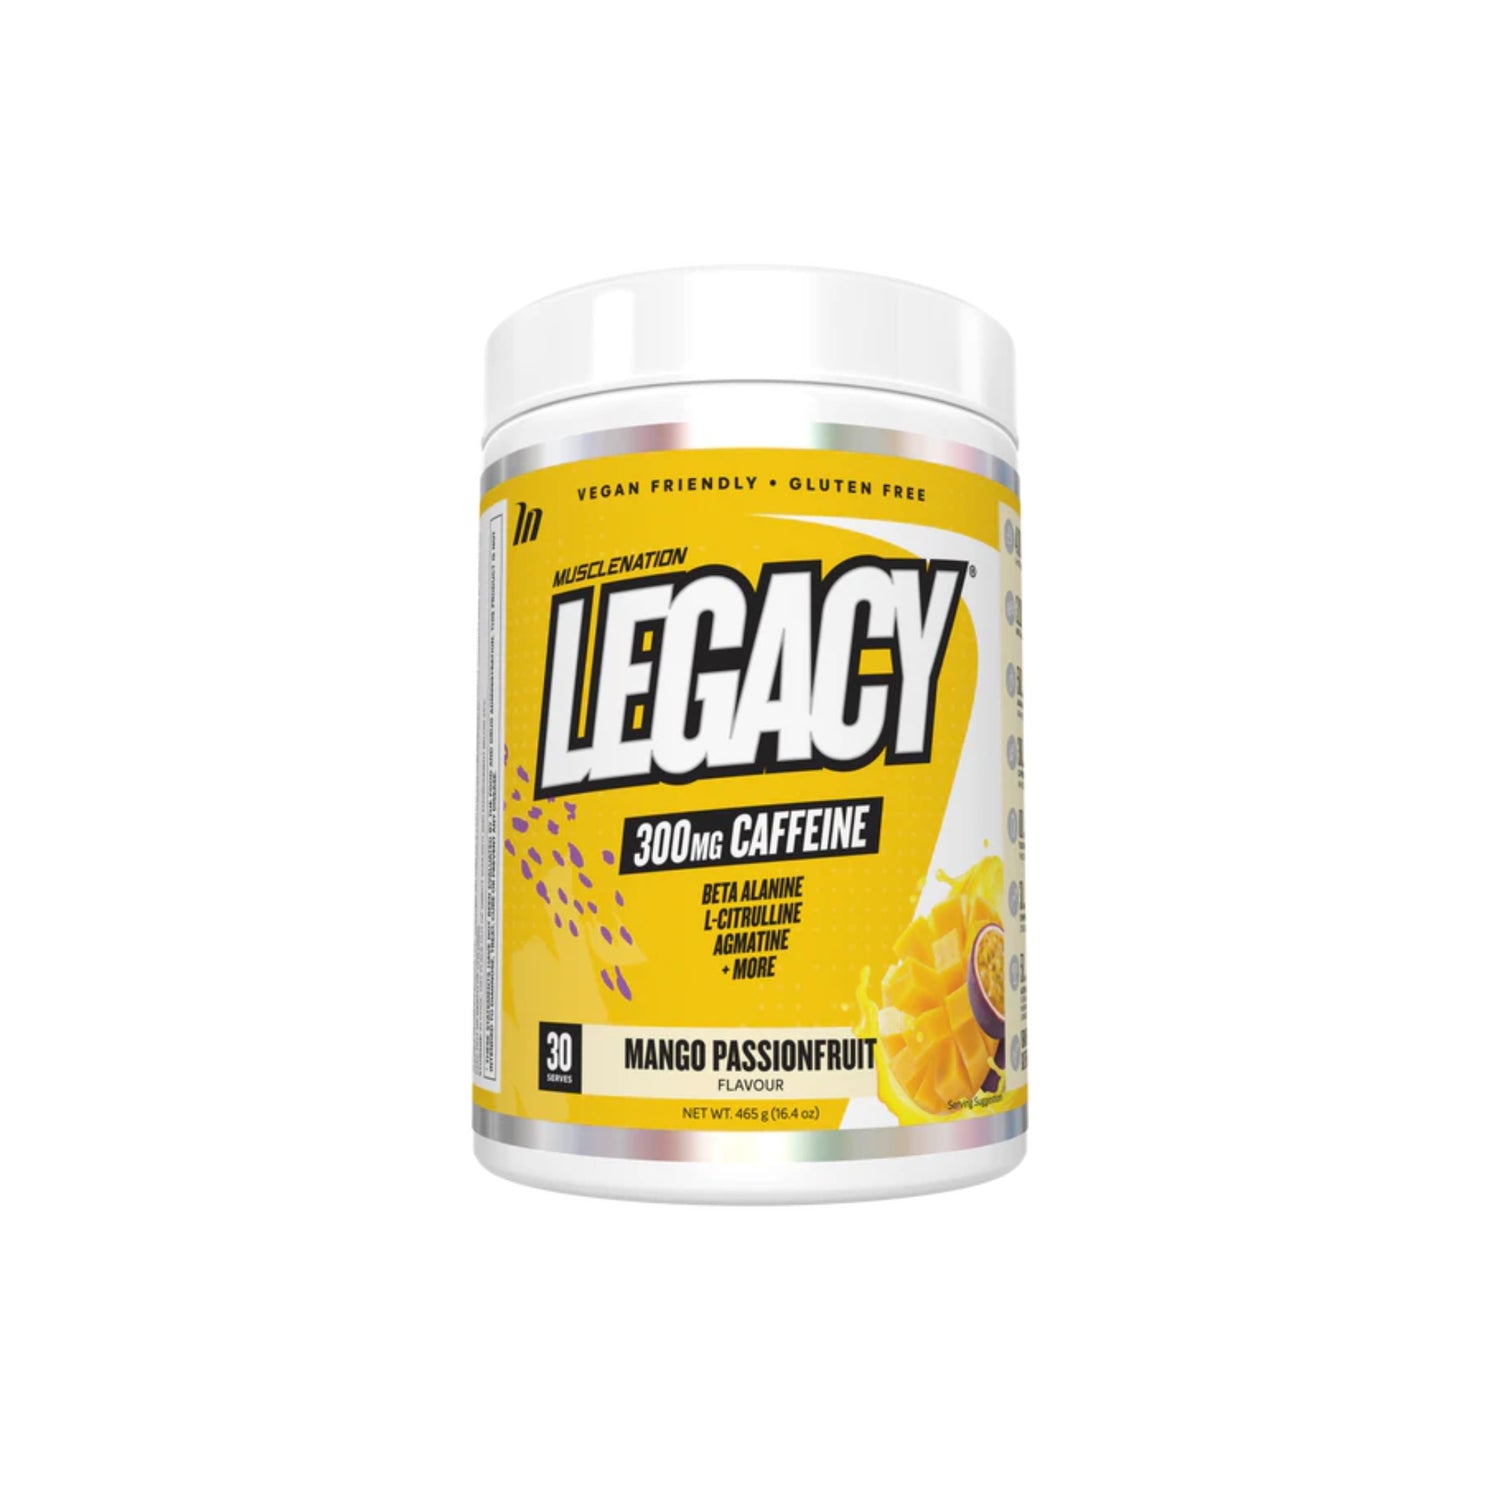 Muscle Nation Legacy Pre-Workout